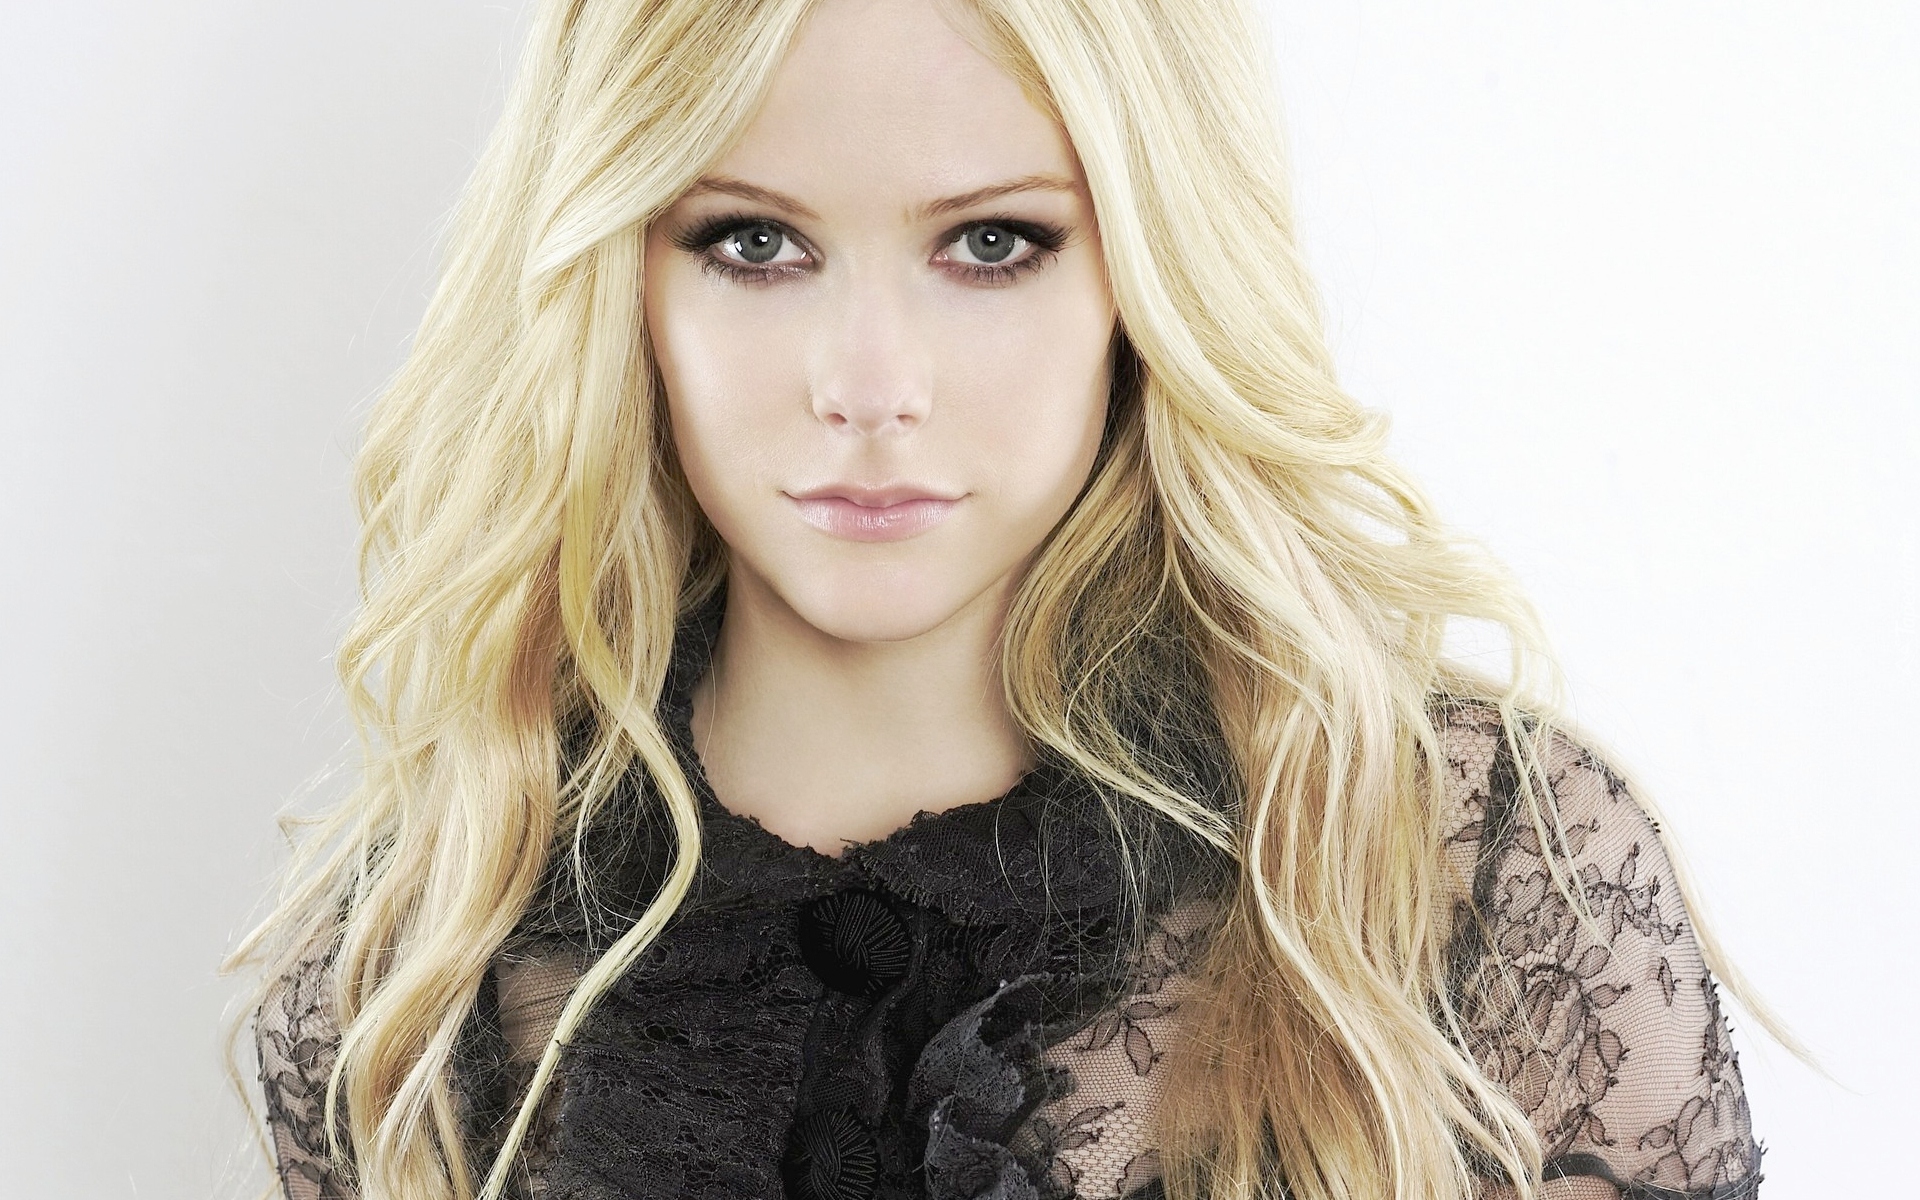 Tapety Avril Lavigne Images, Photos, Reviews